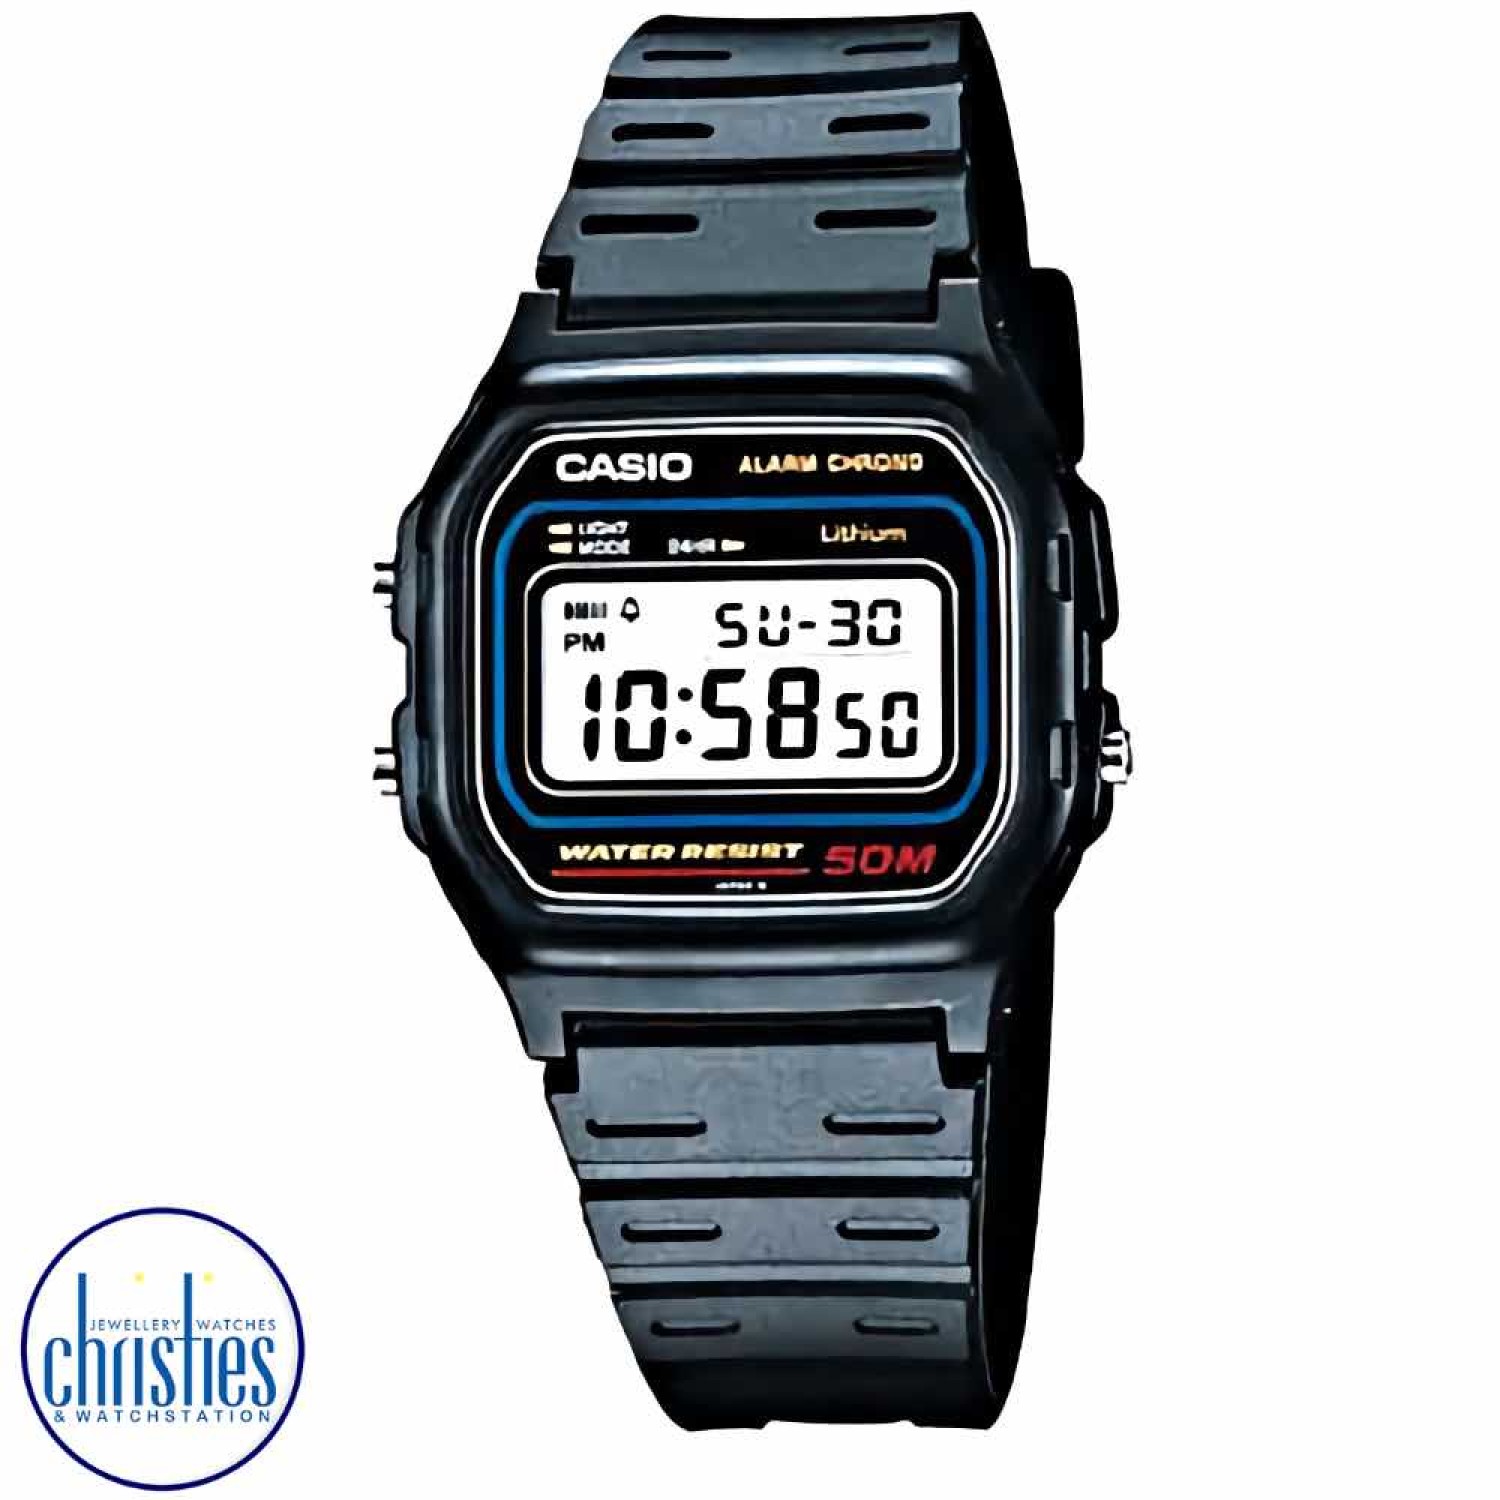 W59-1V Casio. A tried and true style that always remains in fashion. With its daily alarm, hourly time signal and auto calendar, you?ll never need to worry about missing an appointment again. Black Casual Classic Watch with a Resin Ba @christies.online